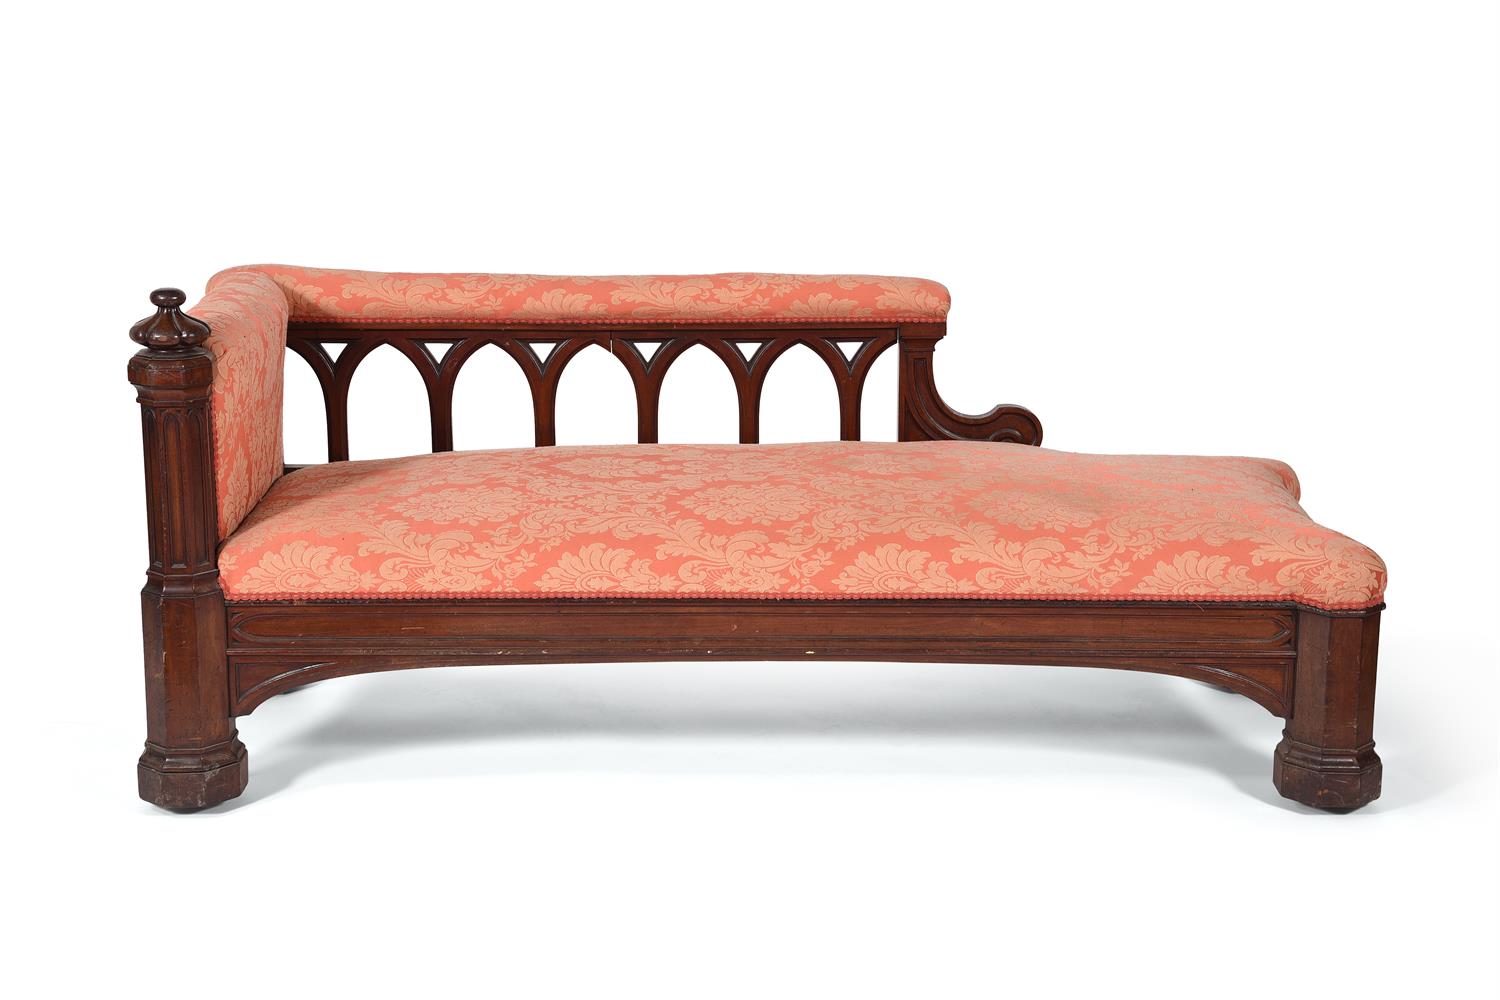 A GOTHIC REVIVAL MAHOGANY AND UPHOLSTERED DAYBED, IN THE MANNER OF A. W. N. PUGIN - Image 3 of 6